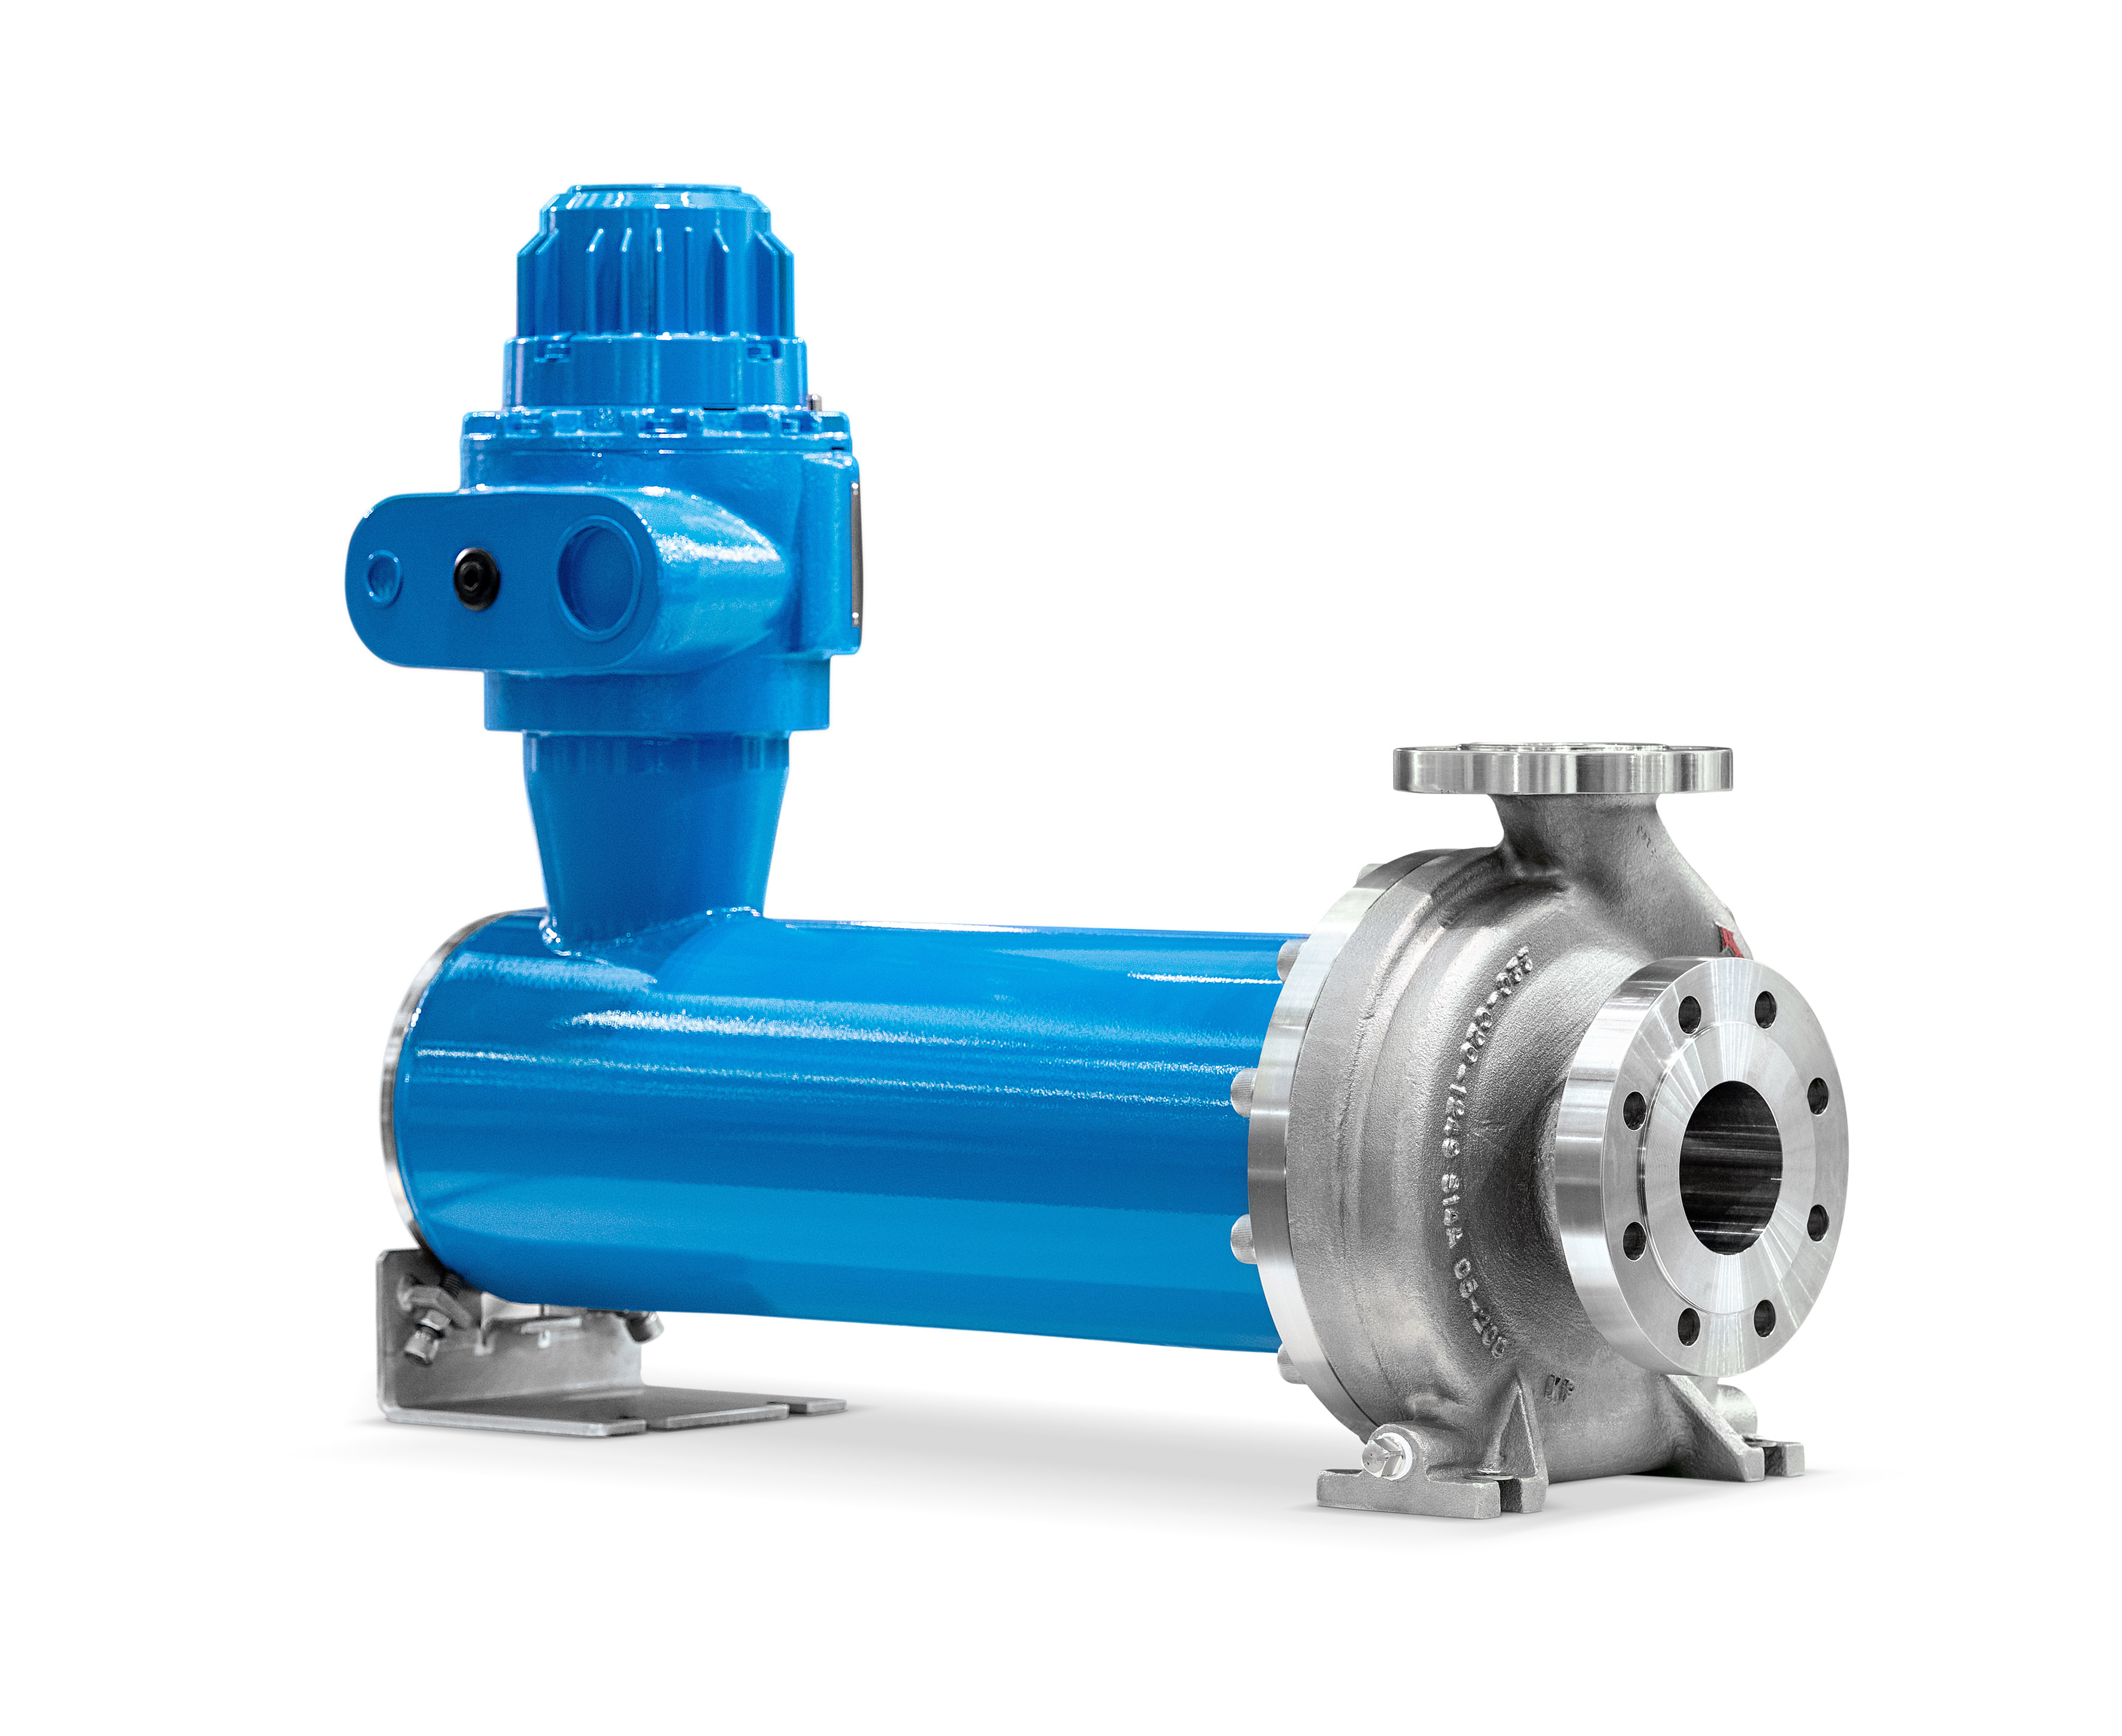 The NIKKISO Non-Seal Iso sealless pump design, which has the motor located inside the pressure-resistant stator casing, is in accordance with DIN EN ISO 2858. (Image: LEWA GmbH)